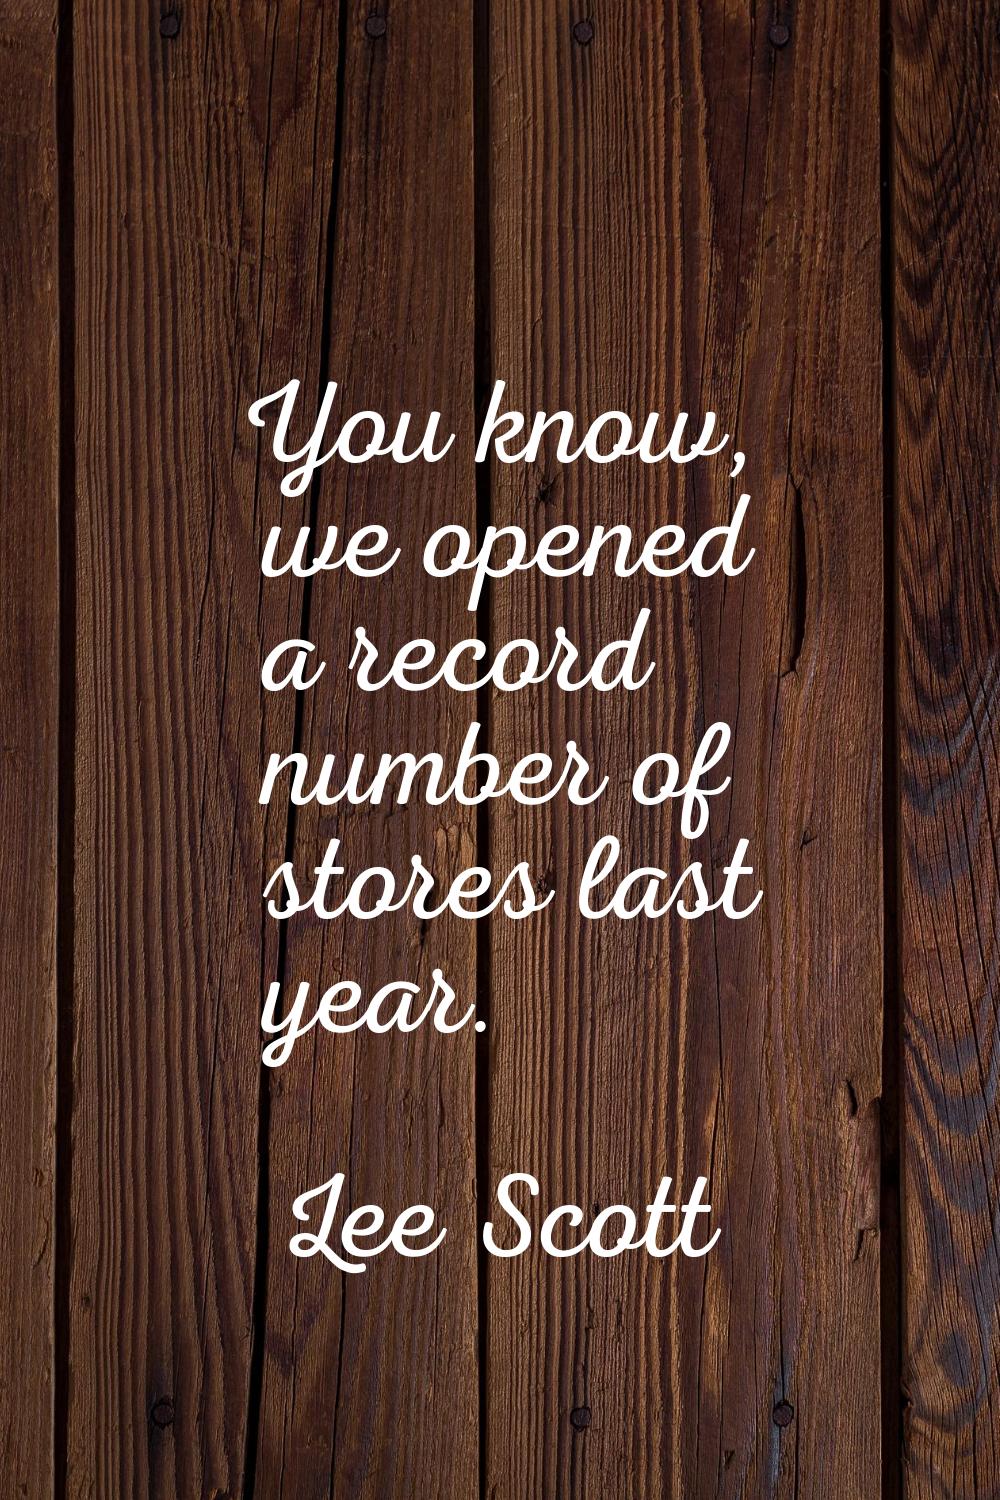 You know, we opened a record number of stores last year.